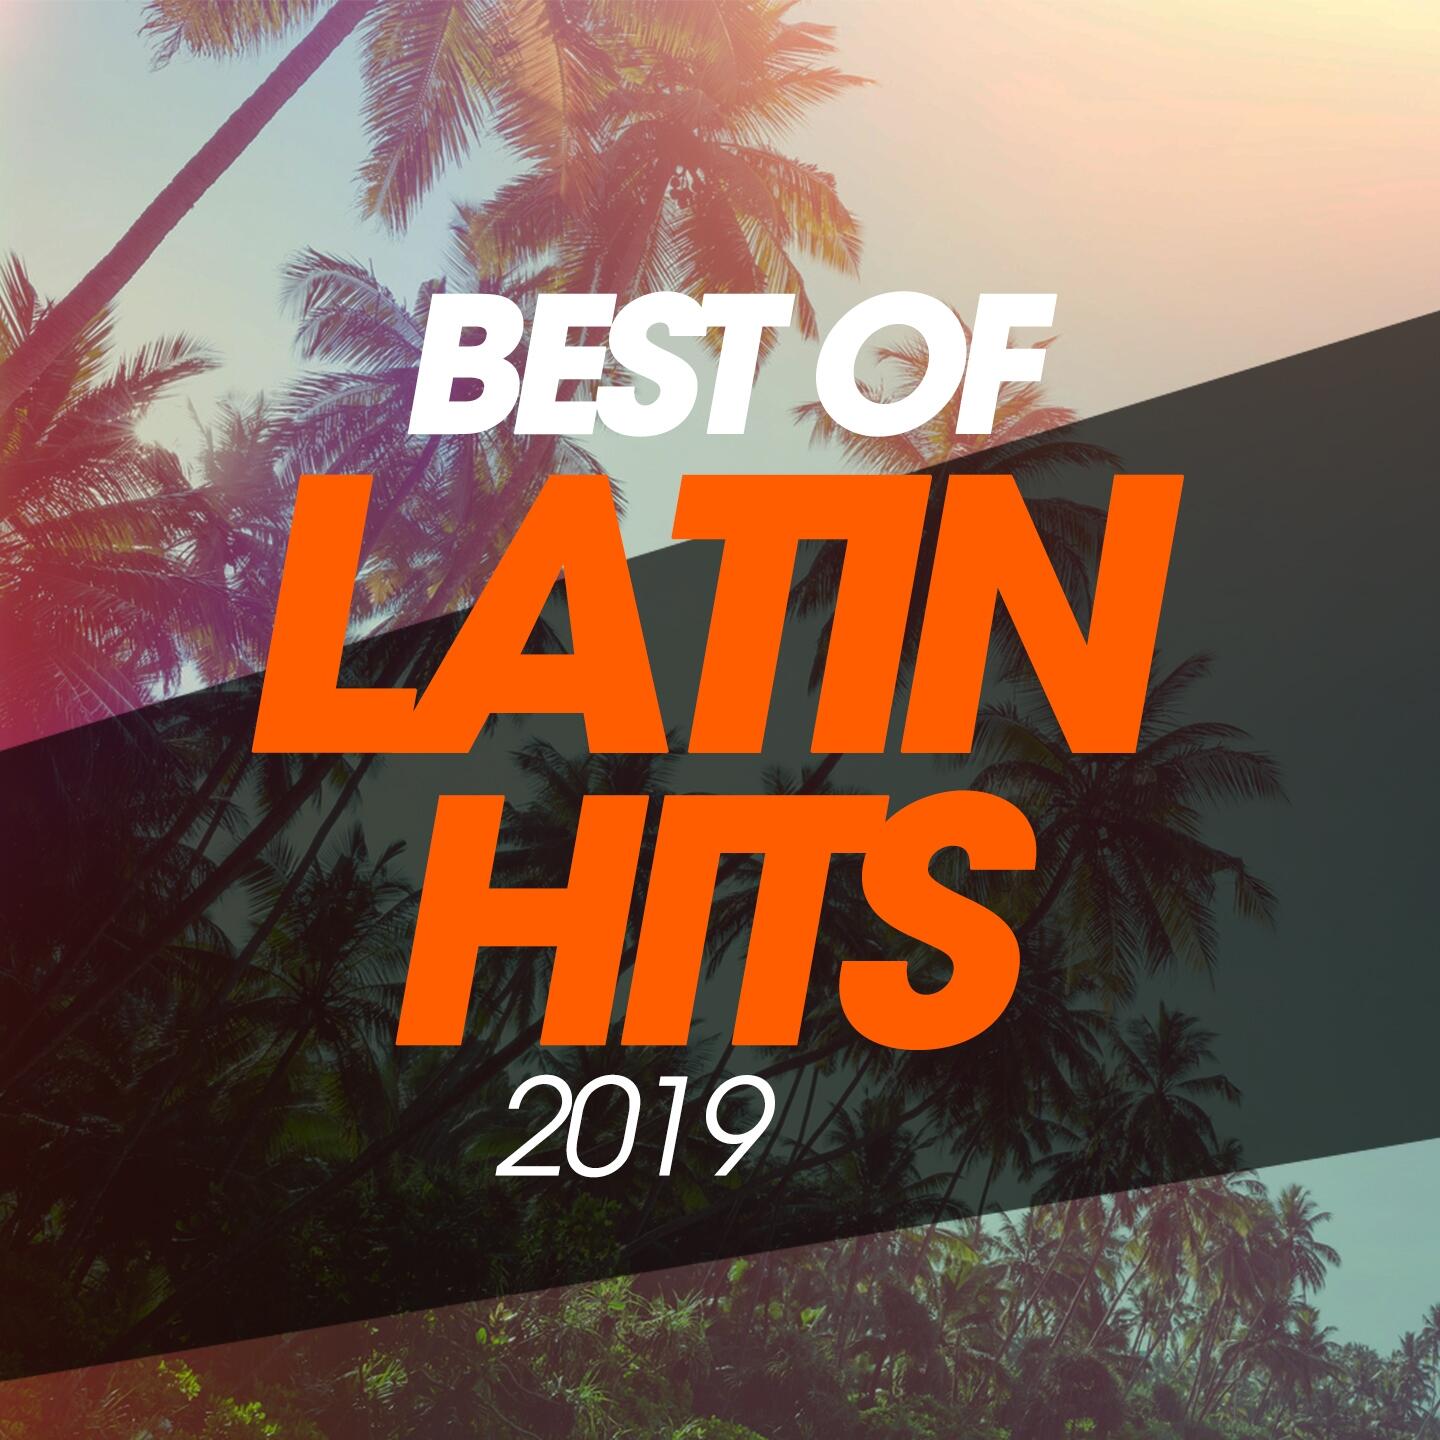 Listen Free to Various Artists Best Of Latin Hits 2019